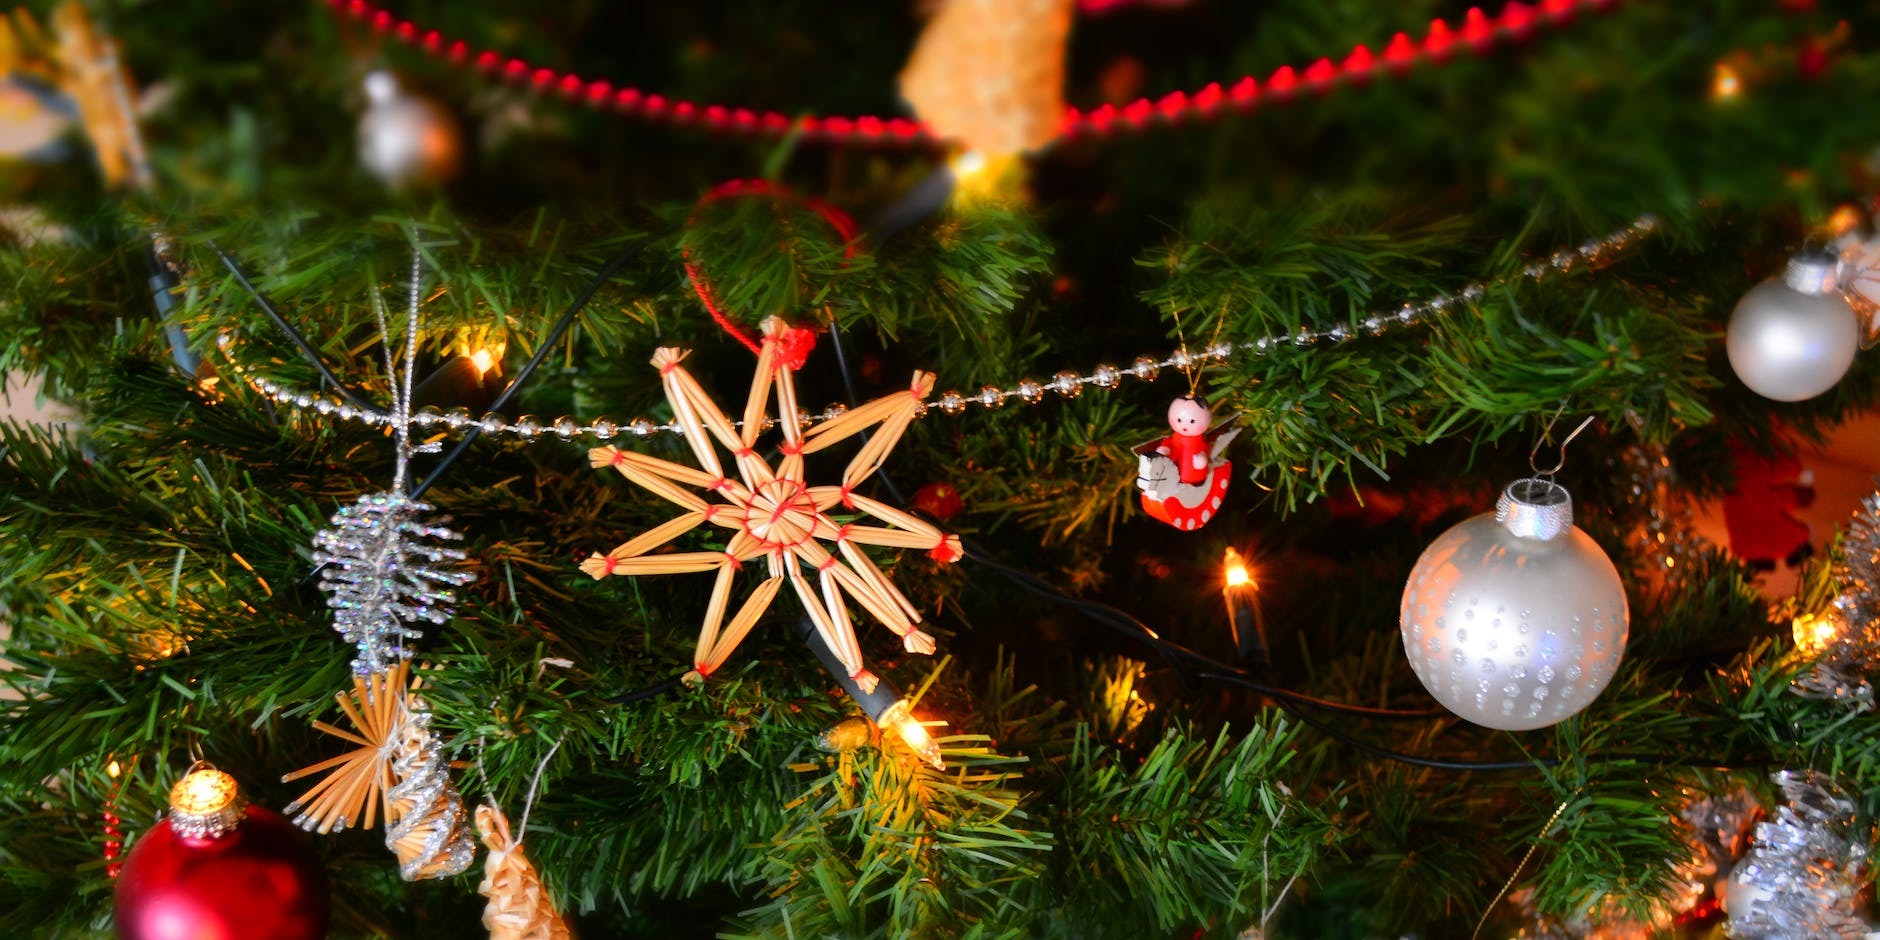 Christmas Tree Traditions: History of Christmas Trees - Symbolism, Traditions and Trivia